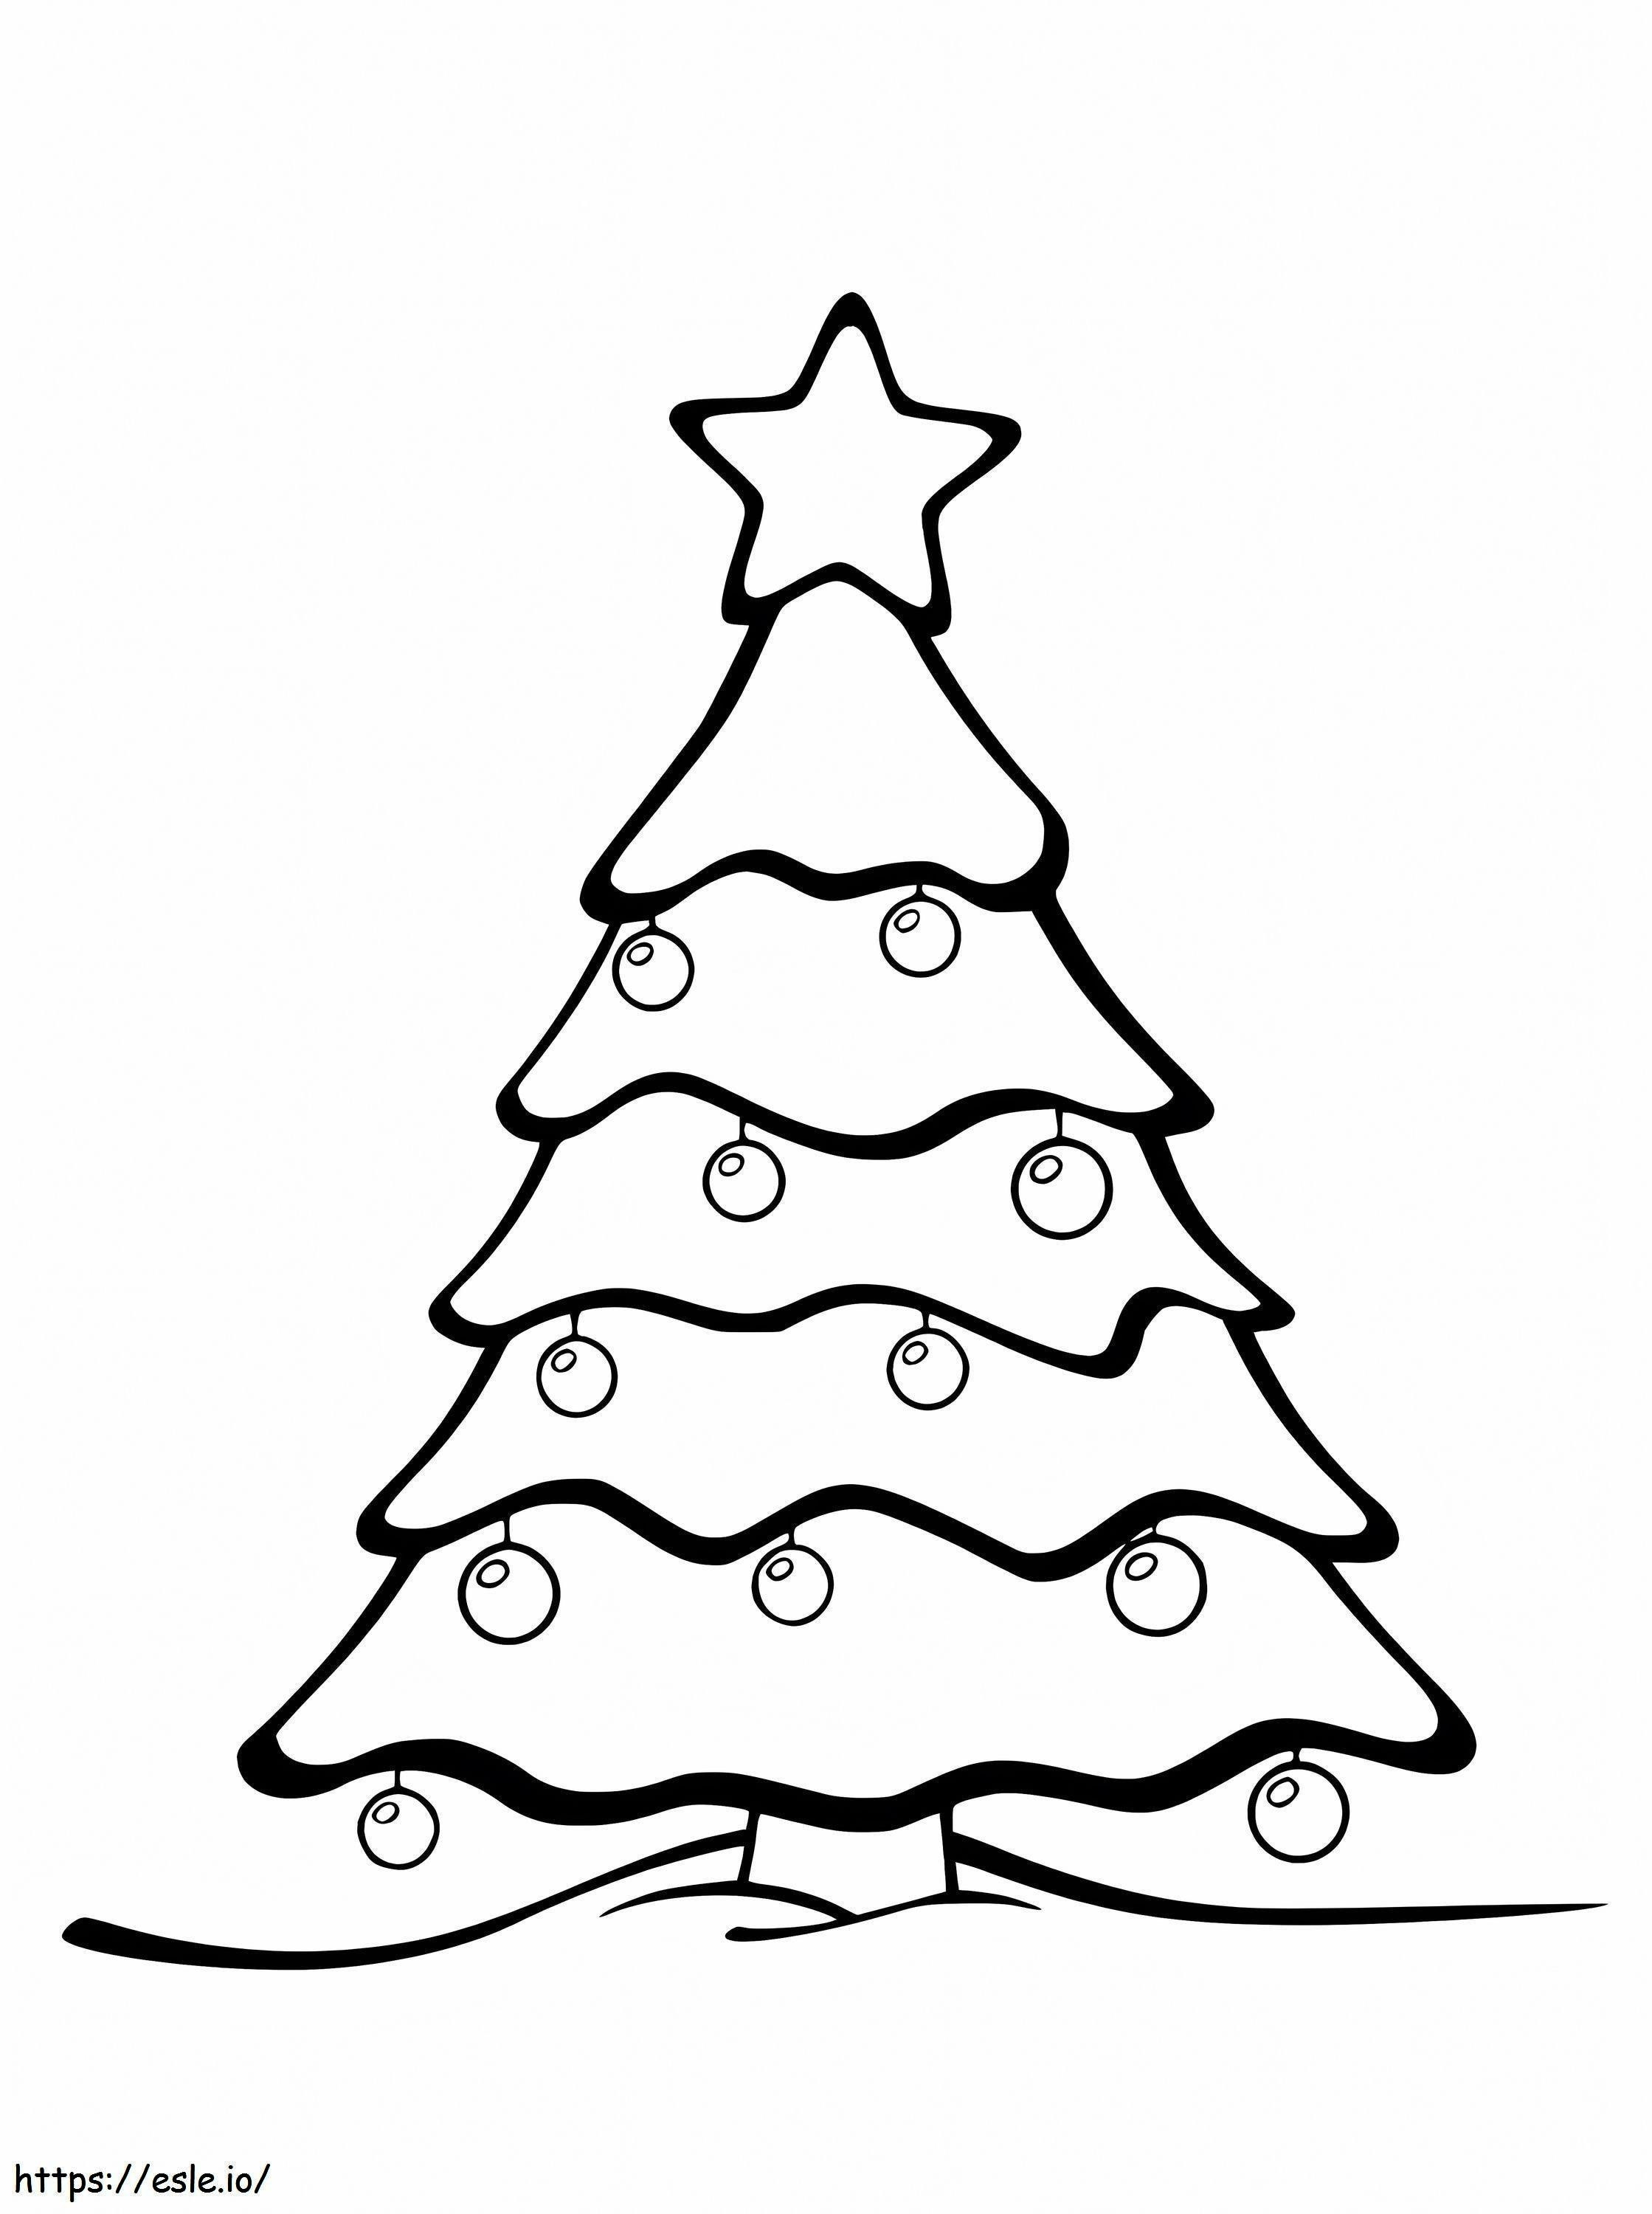 Merry Christmas Tree coloring page